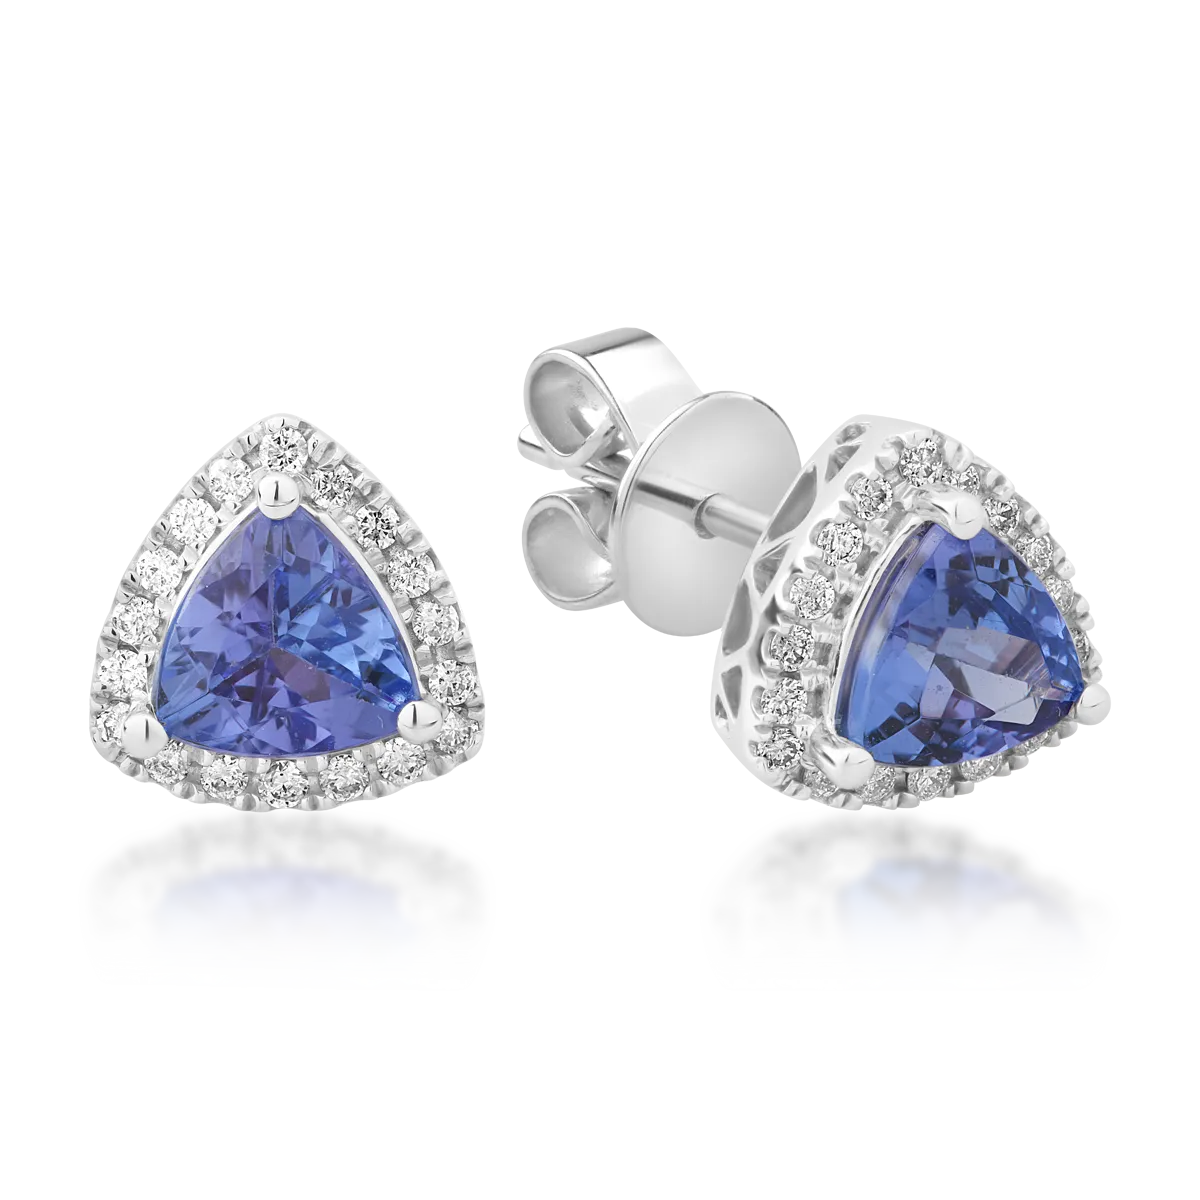 18K white gold earrings with 1.53ct tanzanite and 0.18ct diamonds